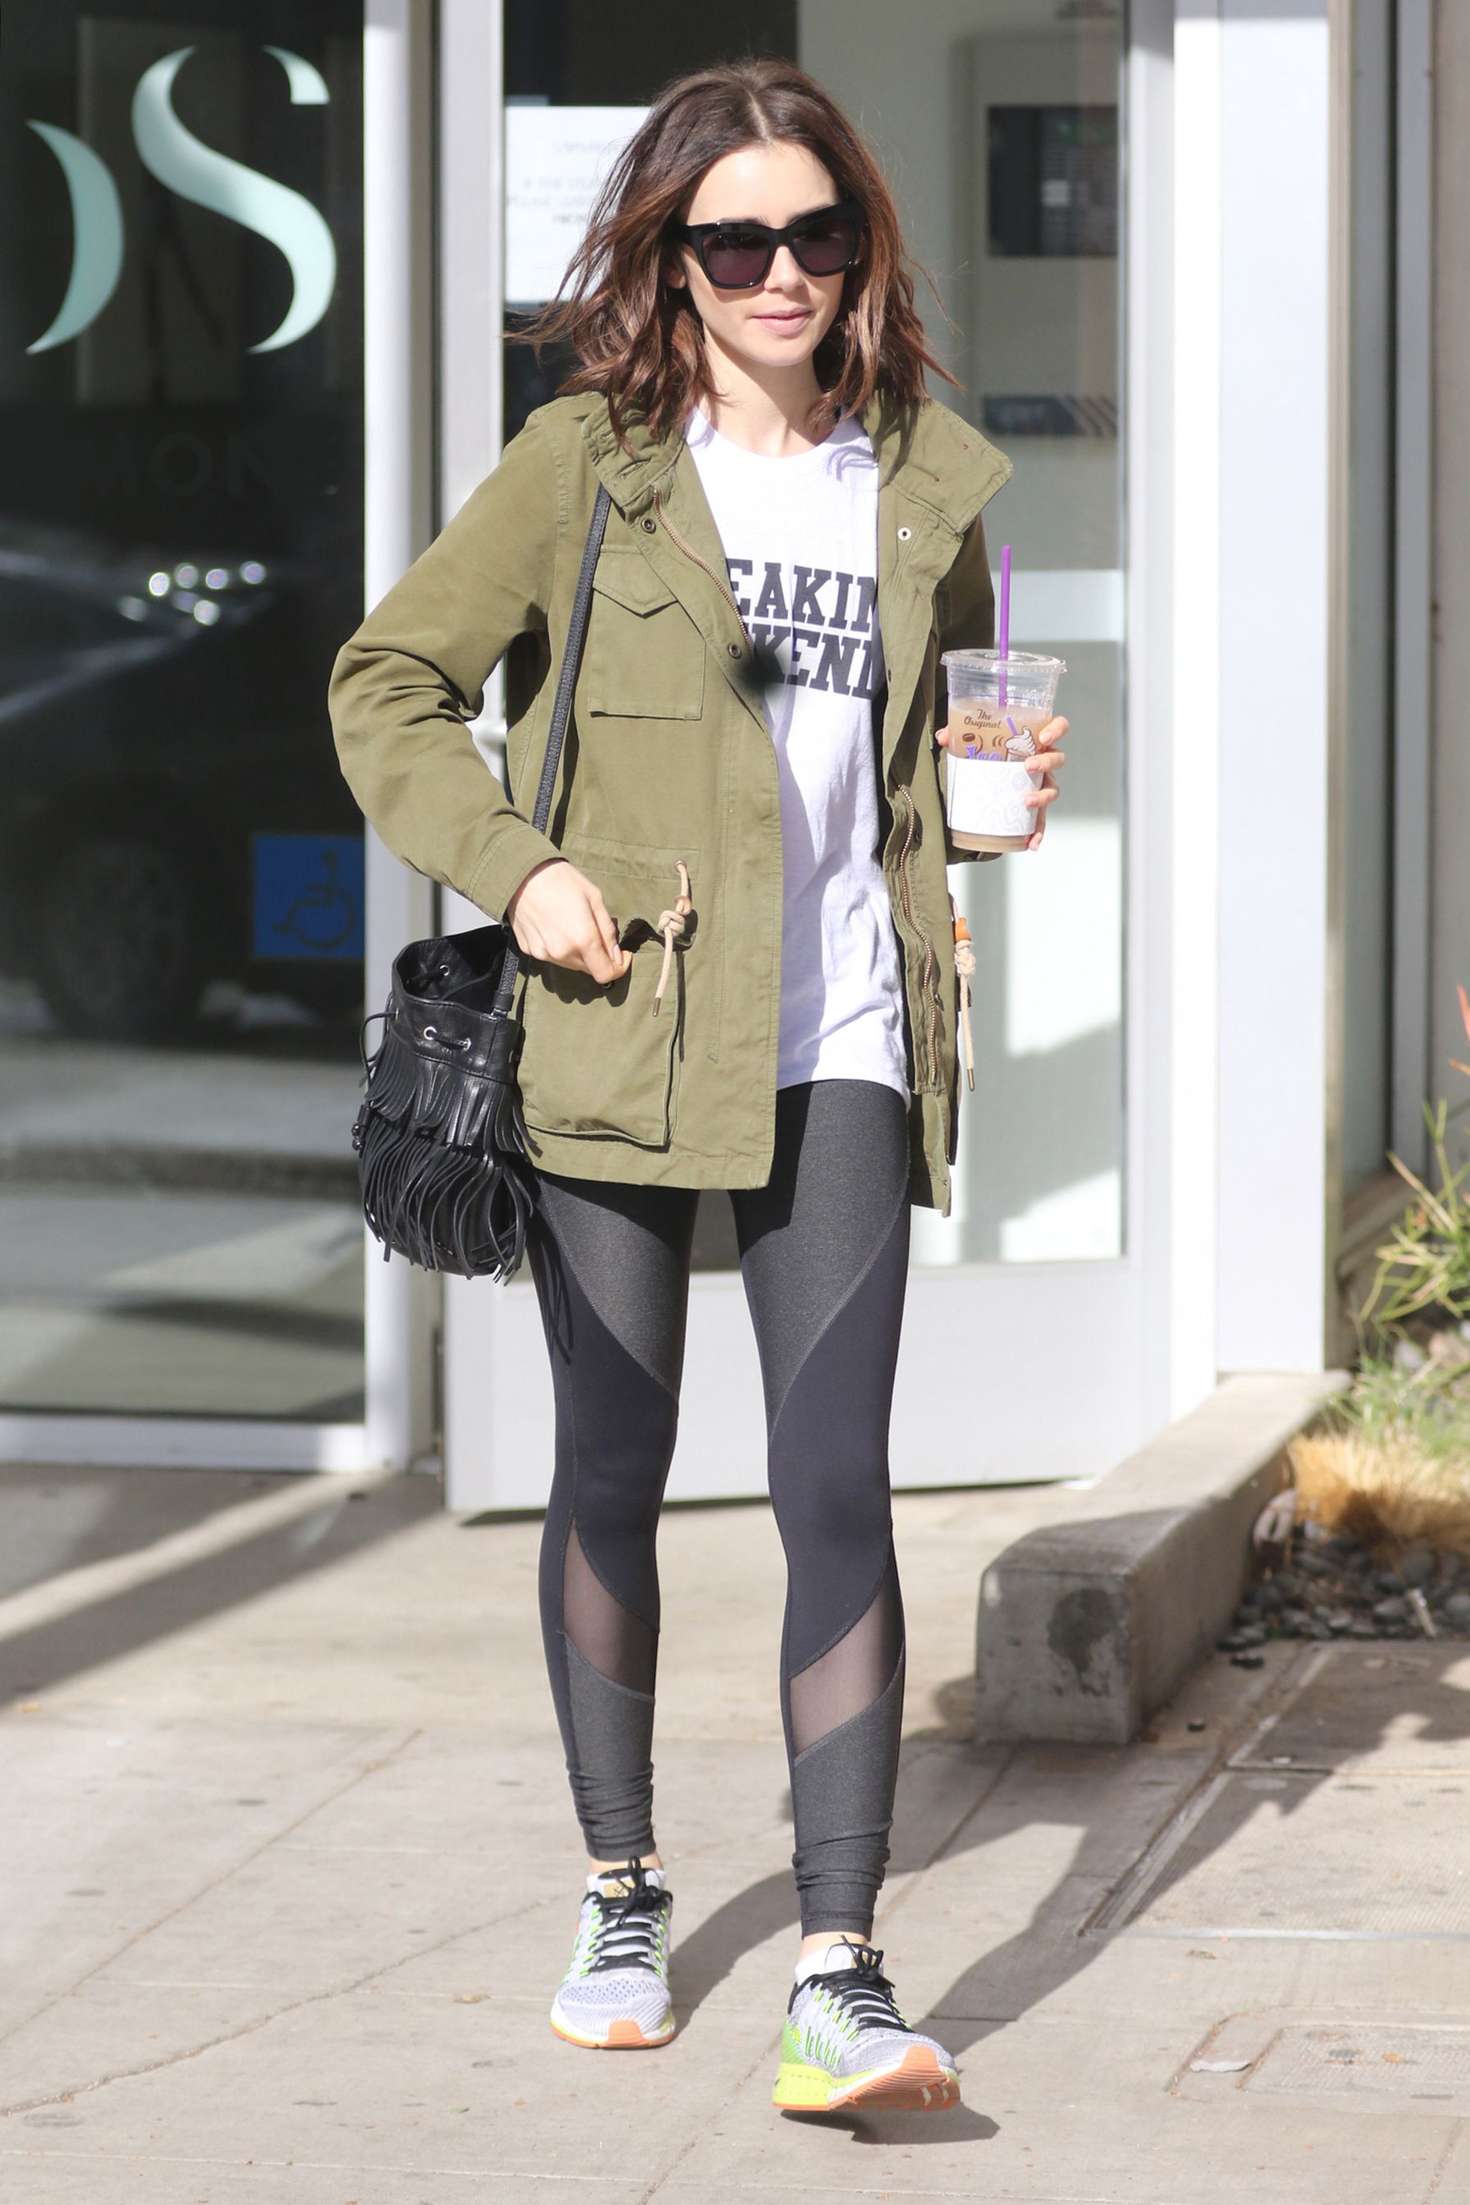 Lily Collins 2016 : Lily Collins in Tights Leaving the gym -01